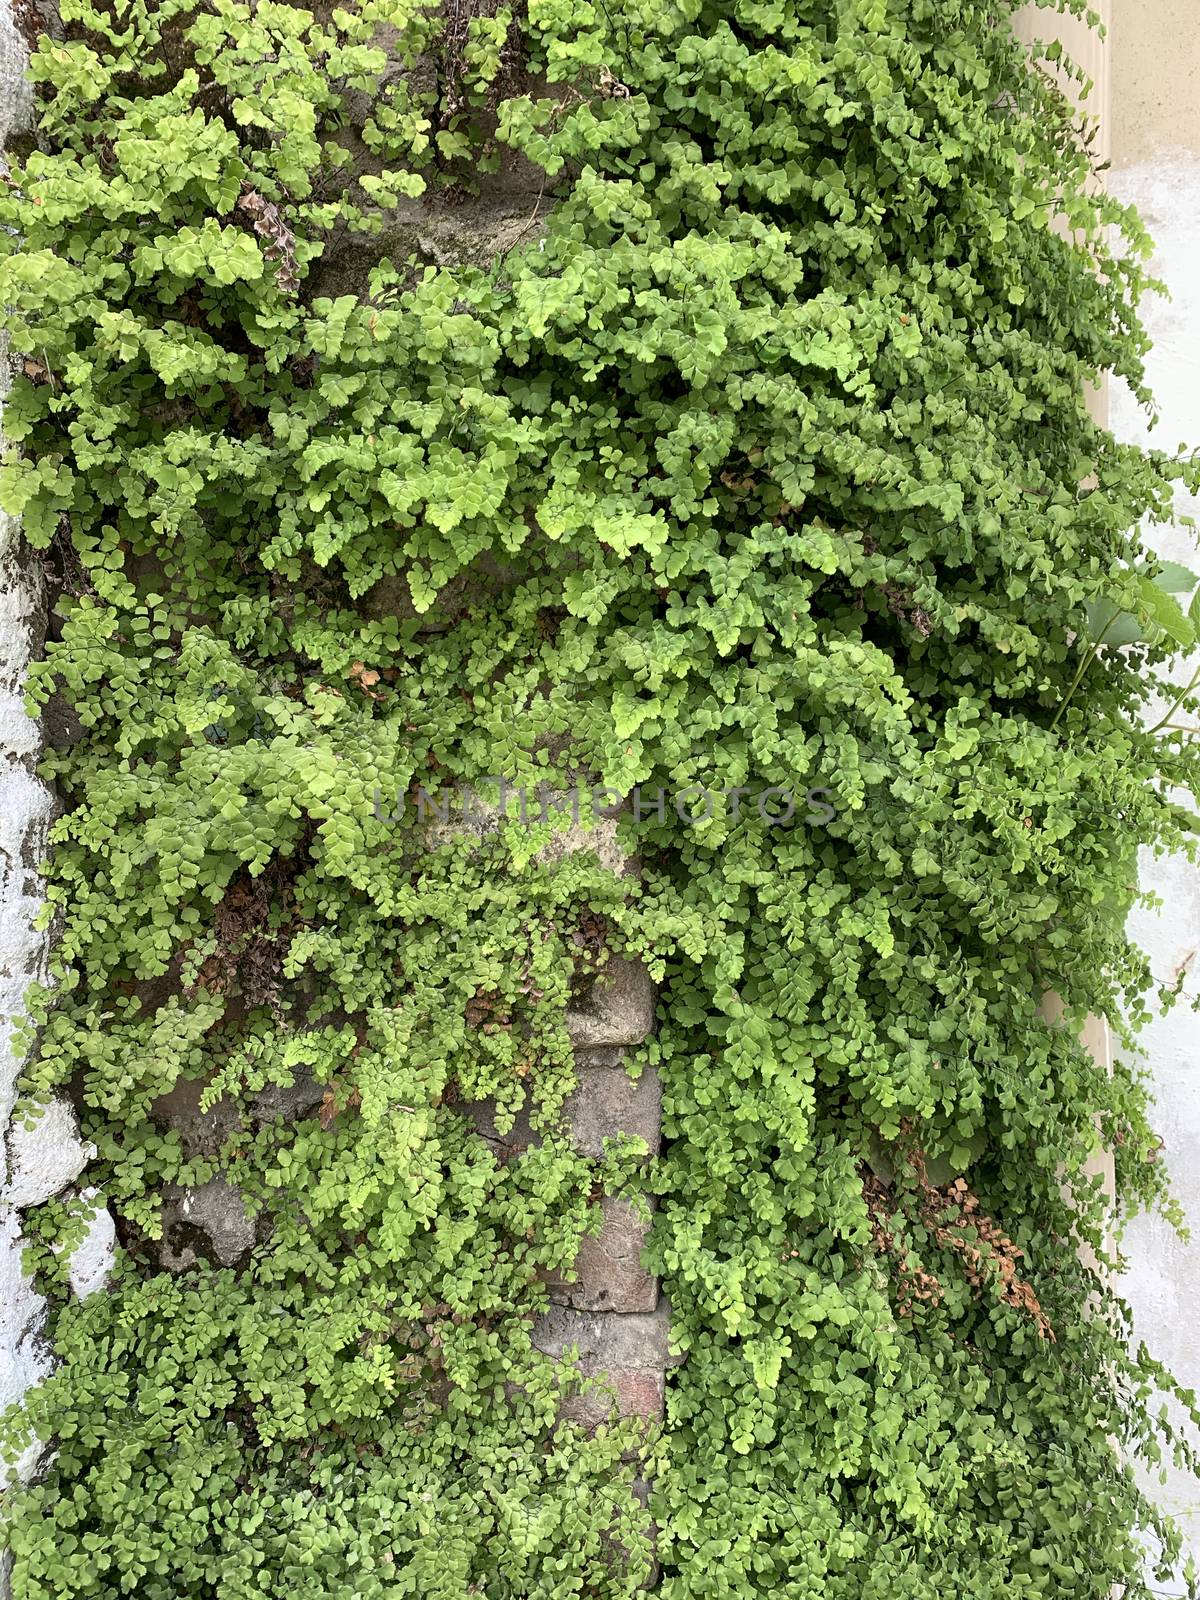 green ivy plant covering the outside wall of the building